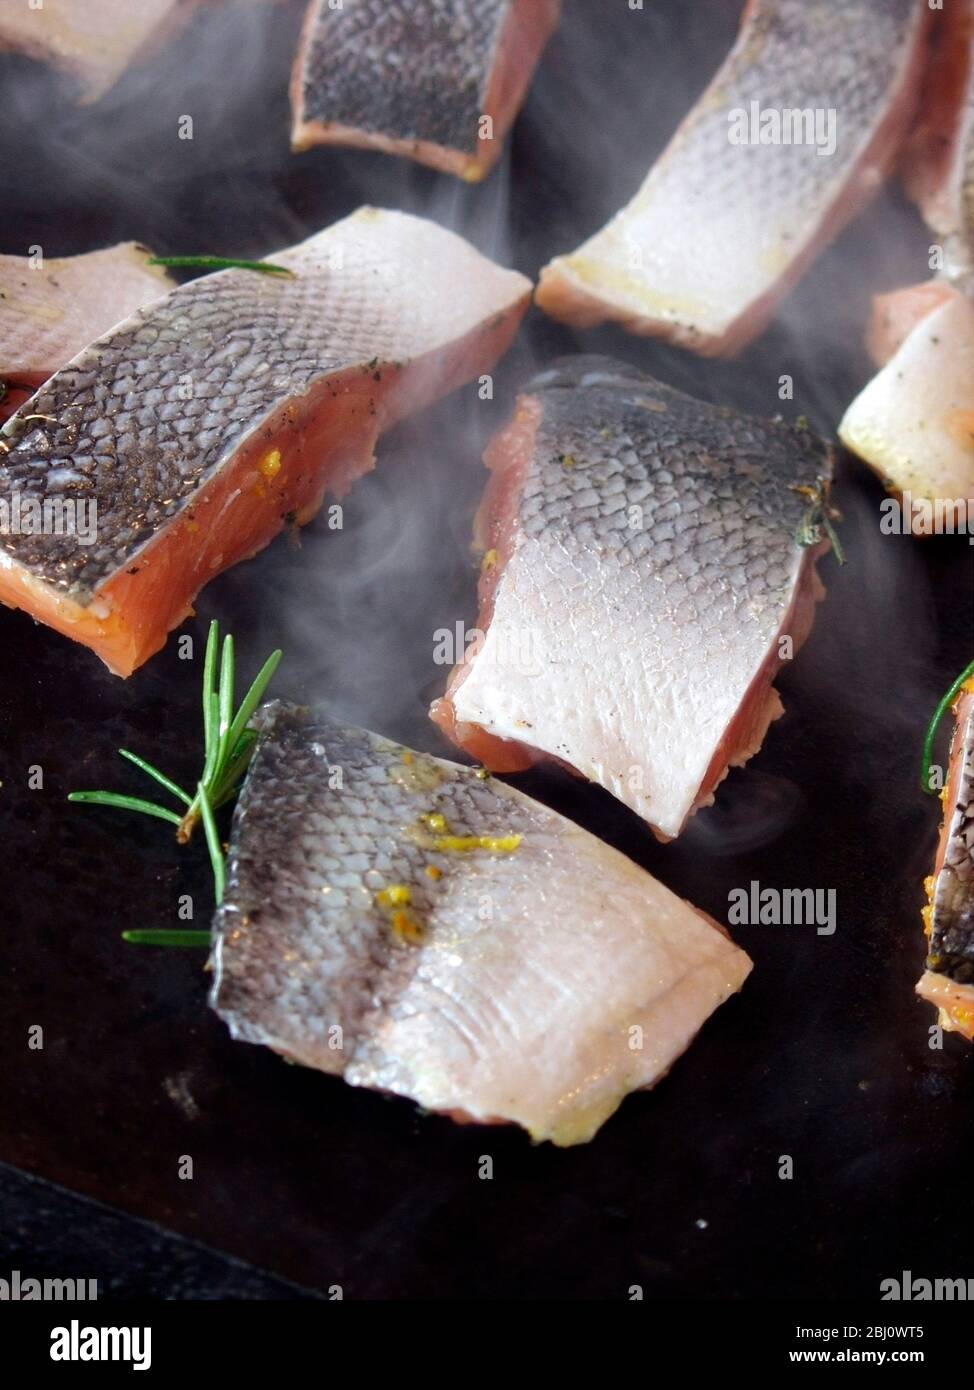 Pieces of salmon fillet being seared on hot griddle witholive oil and rosemary - Stock Photo